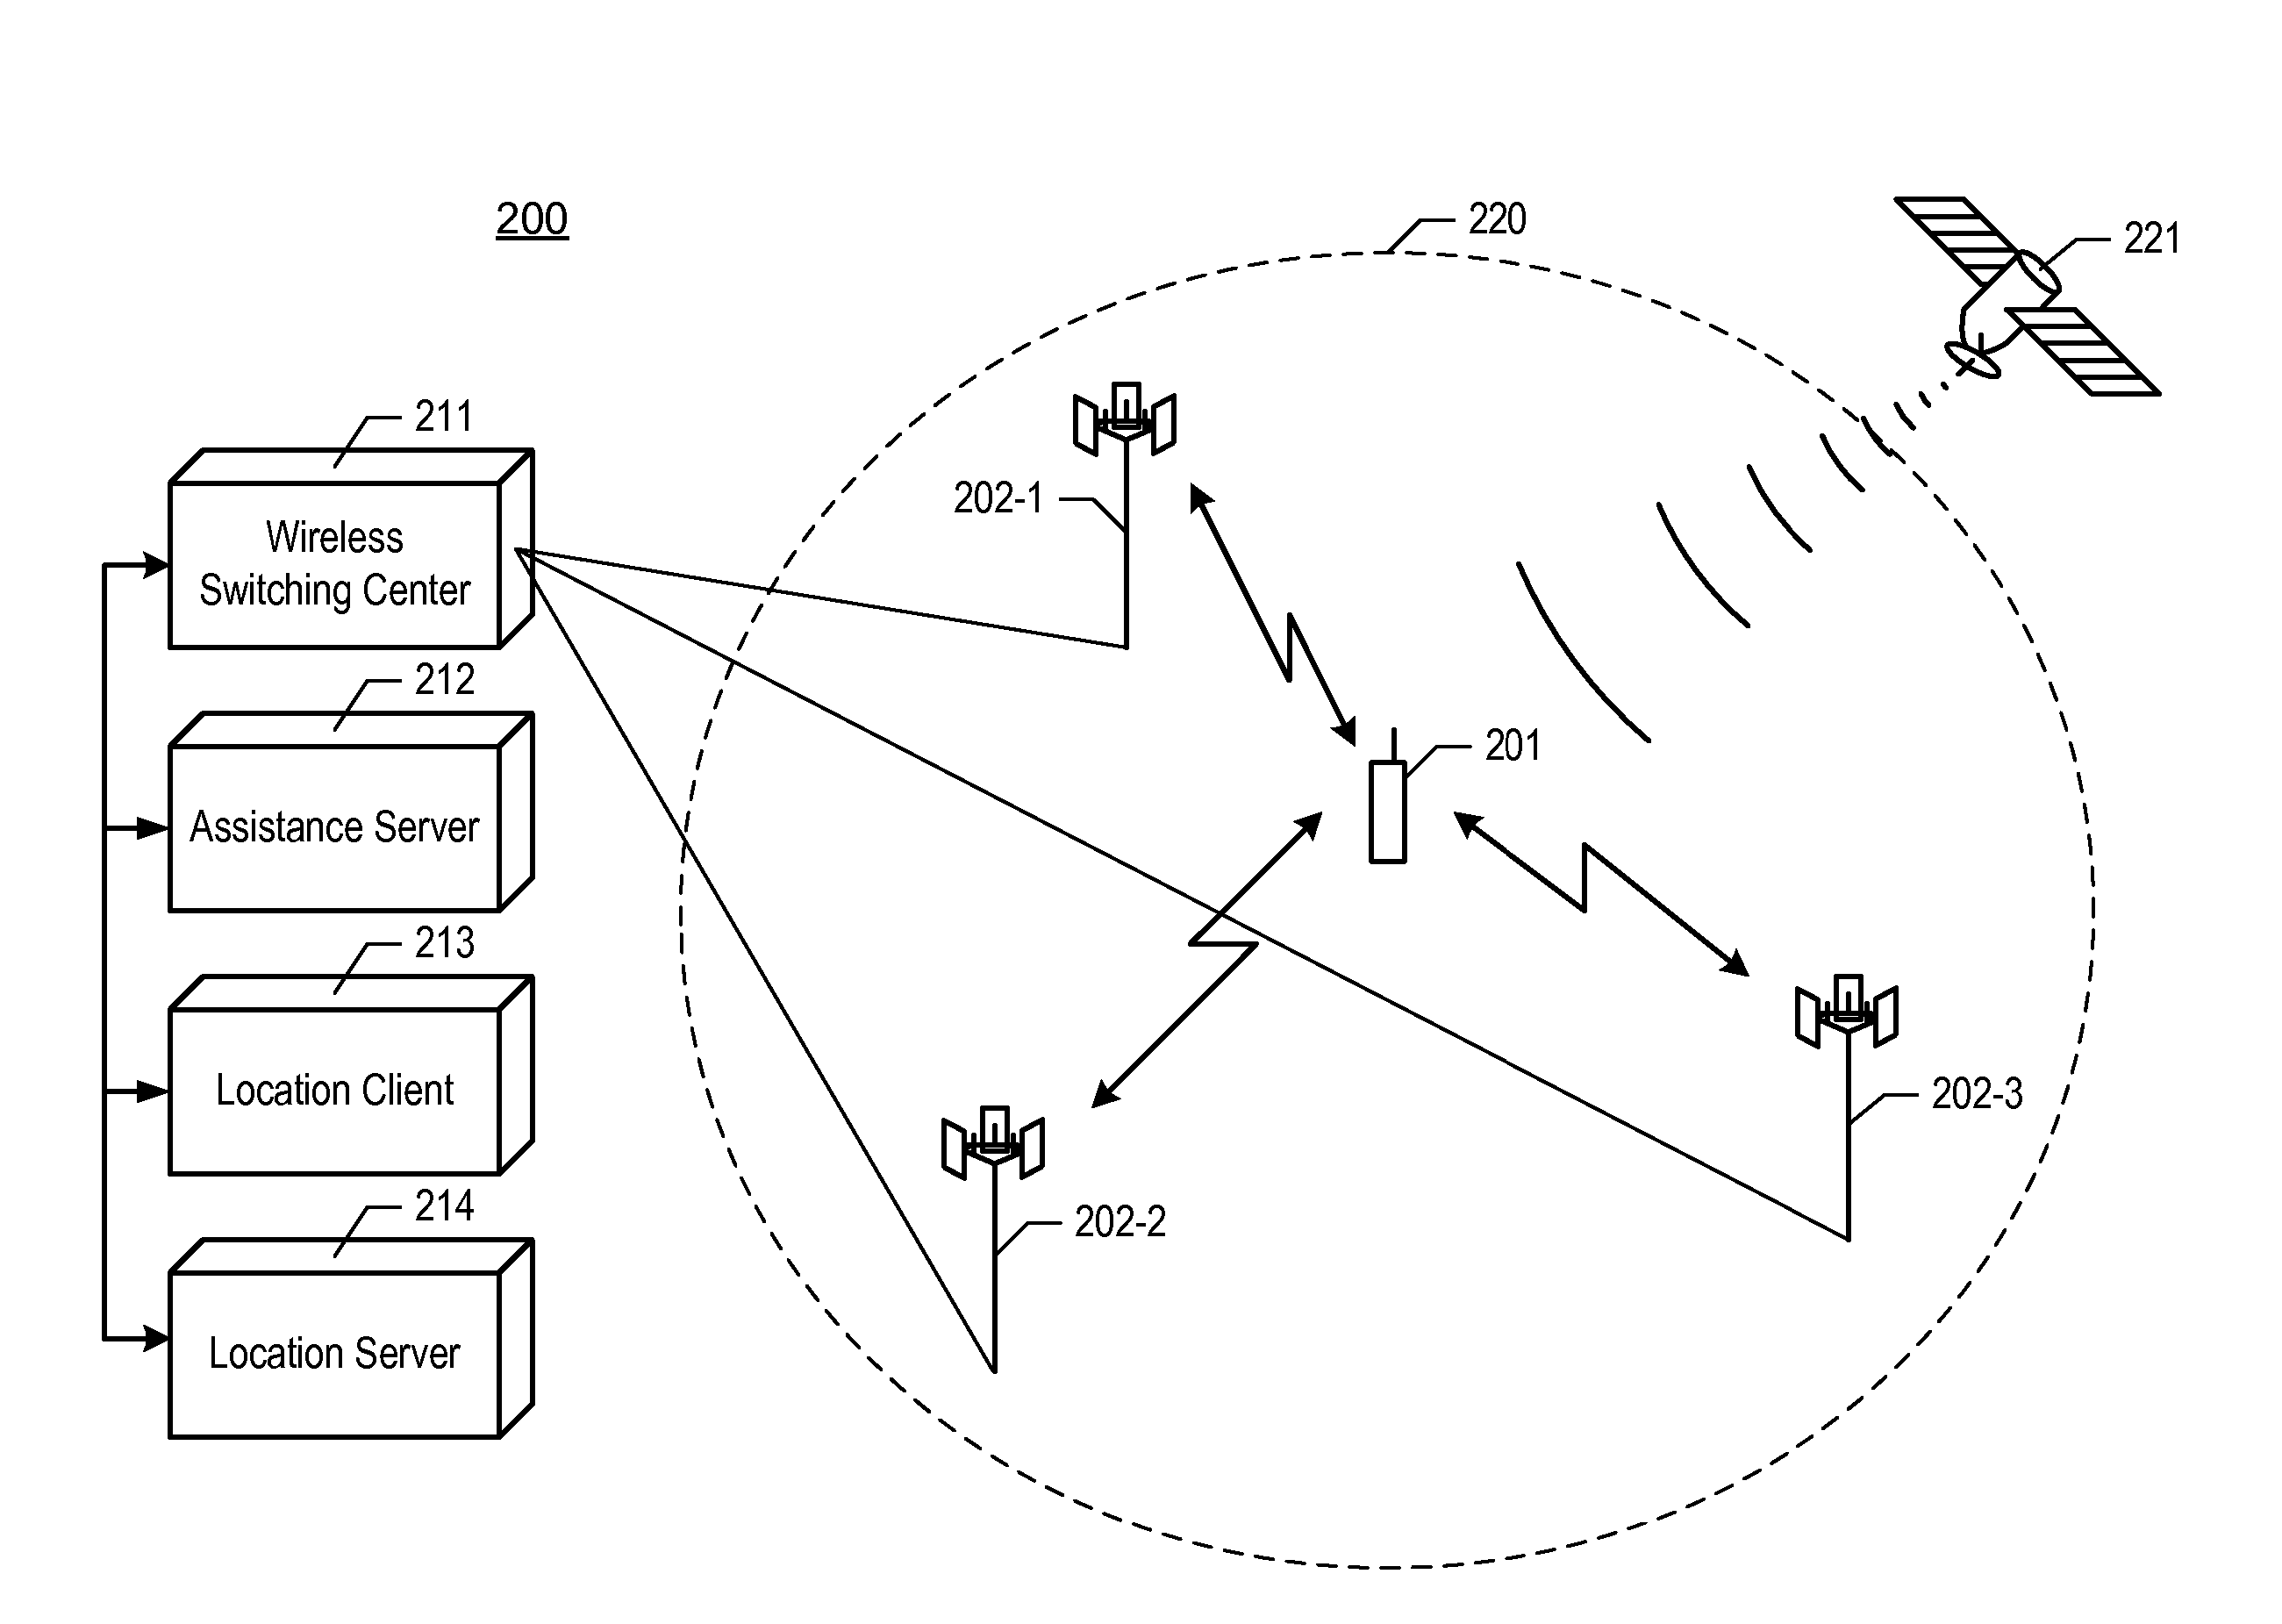 Estimating the Location of a Wireless Terminal Based on Non-Uniform Probabilities of Movement